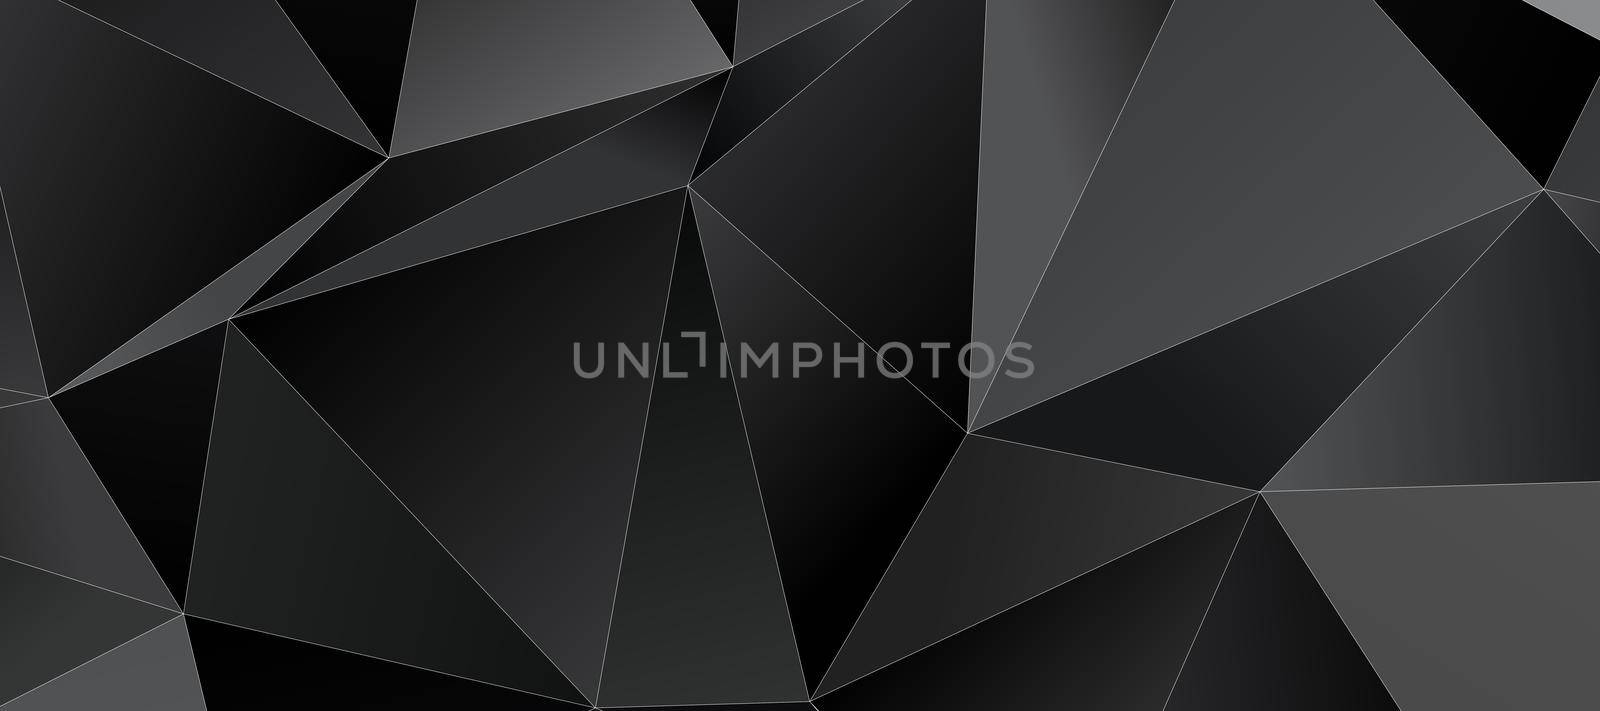 Abstract black triangle background with thin white stroke, low poly pattern illustration